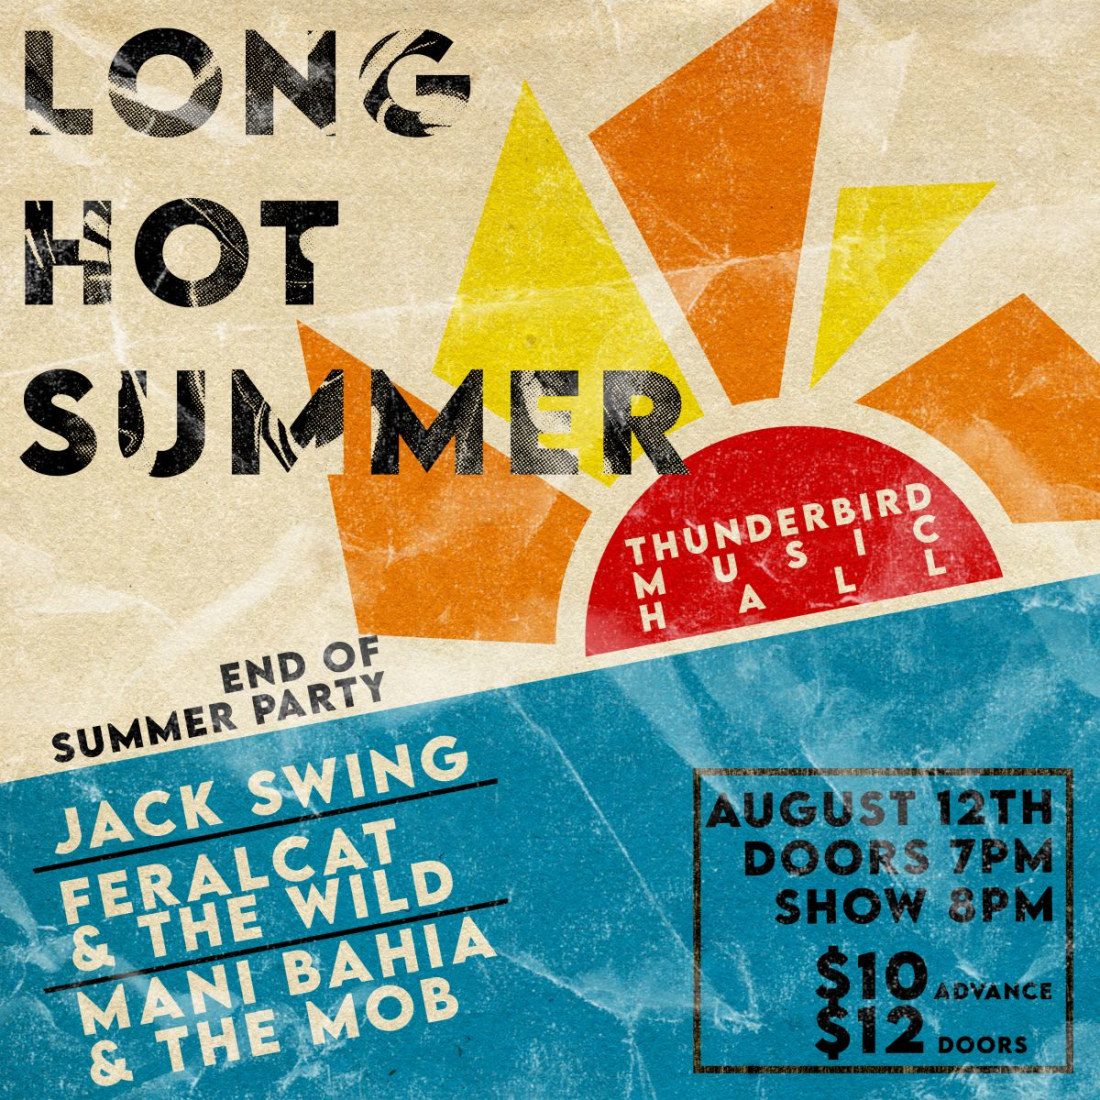 Long Hot Summer with Jack Swing, Feralcat and the Wild, and Mani Bahia & the Mob